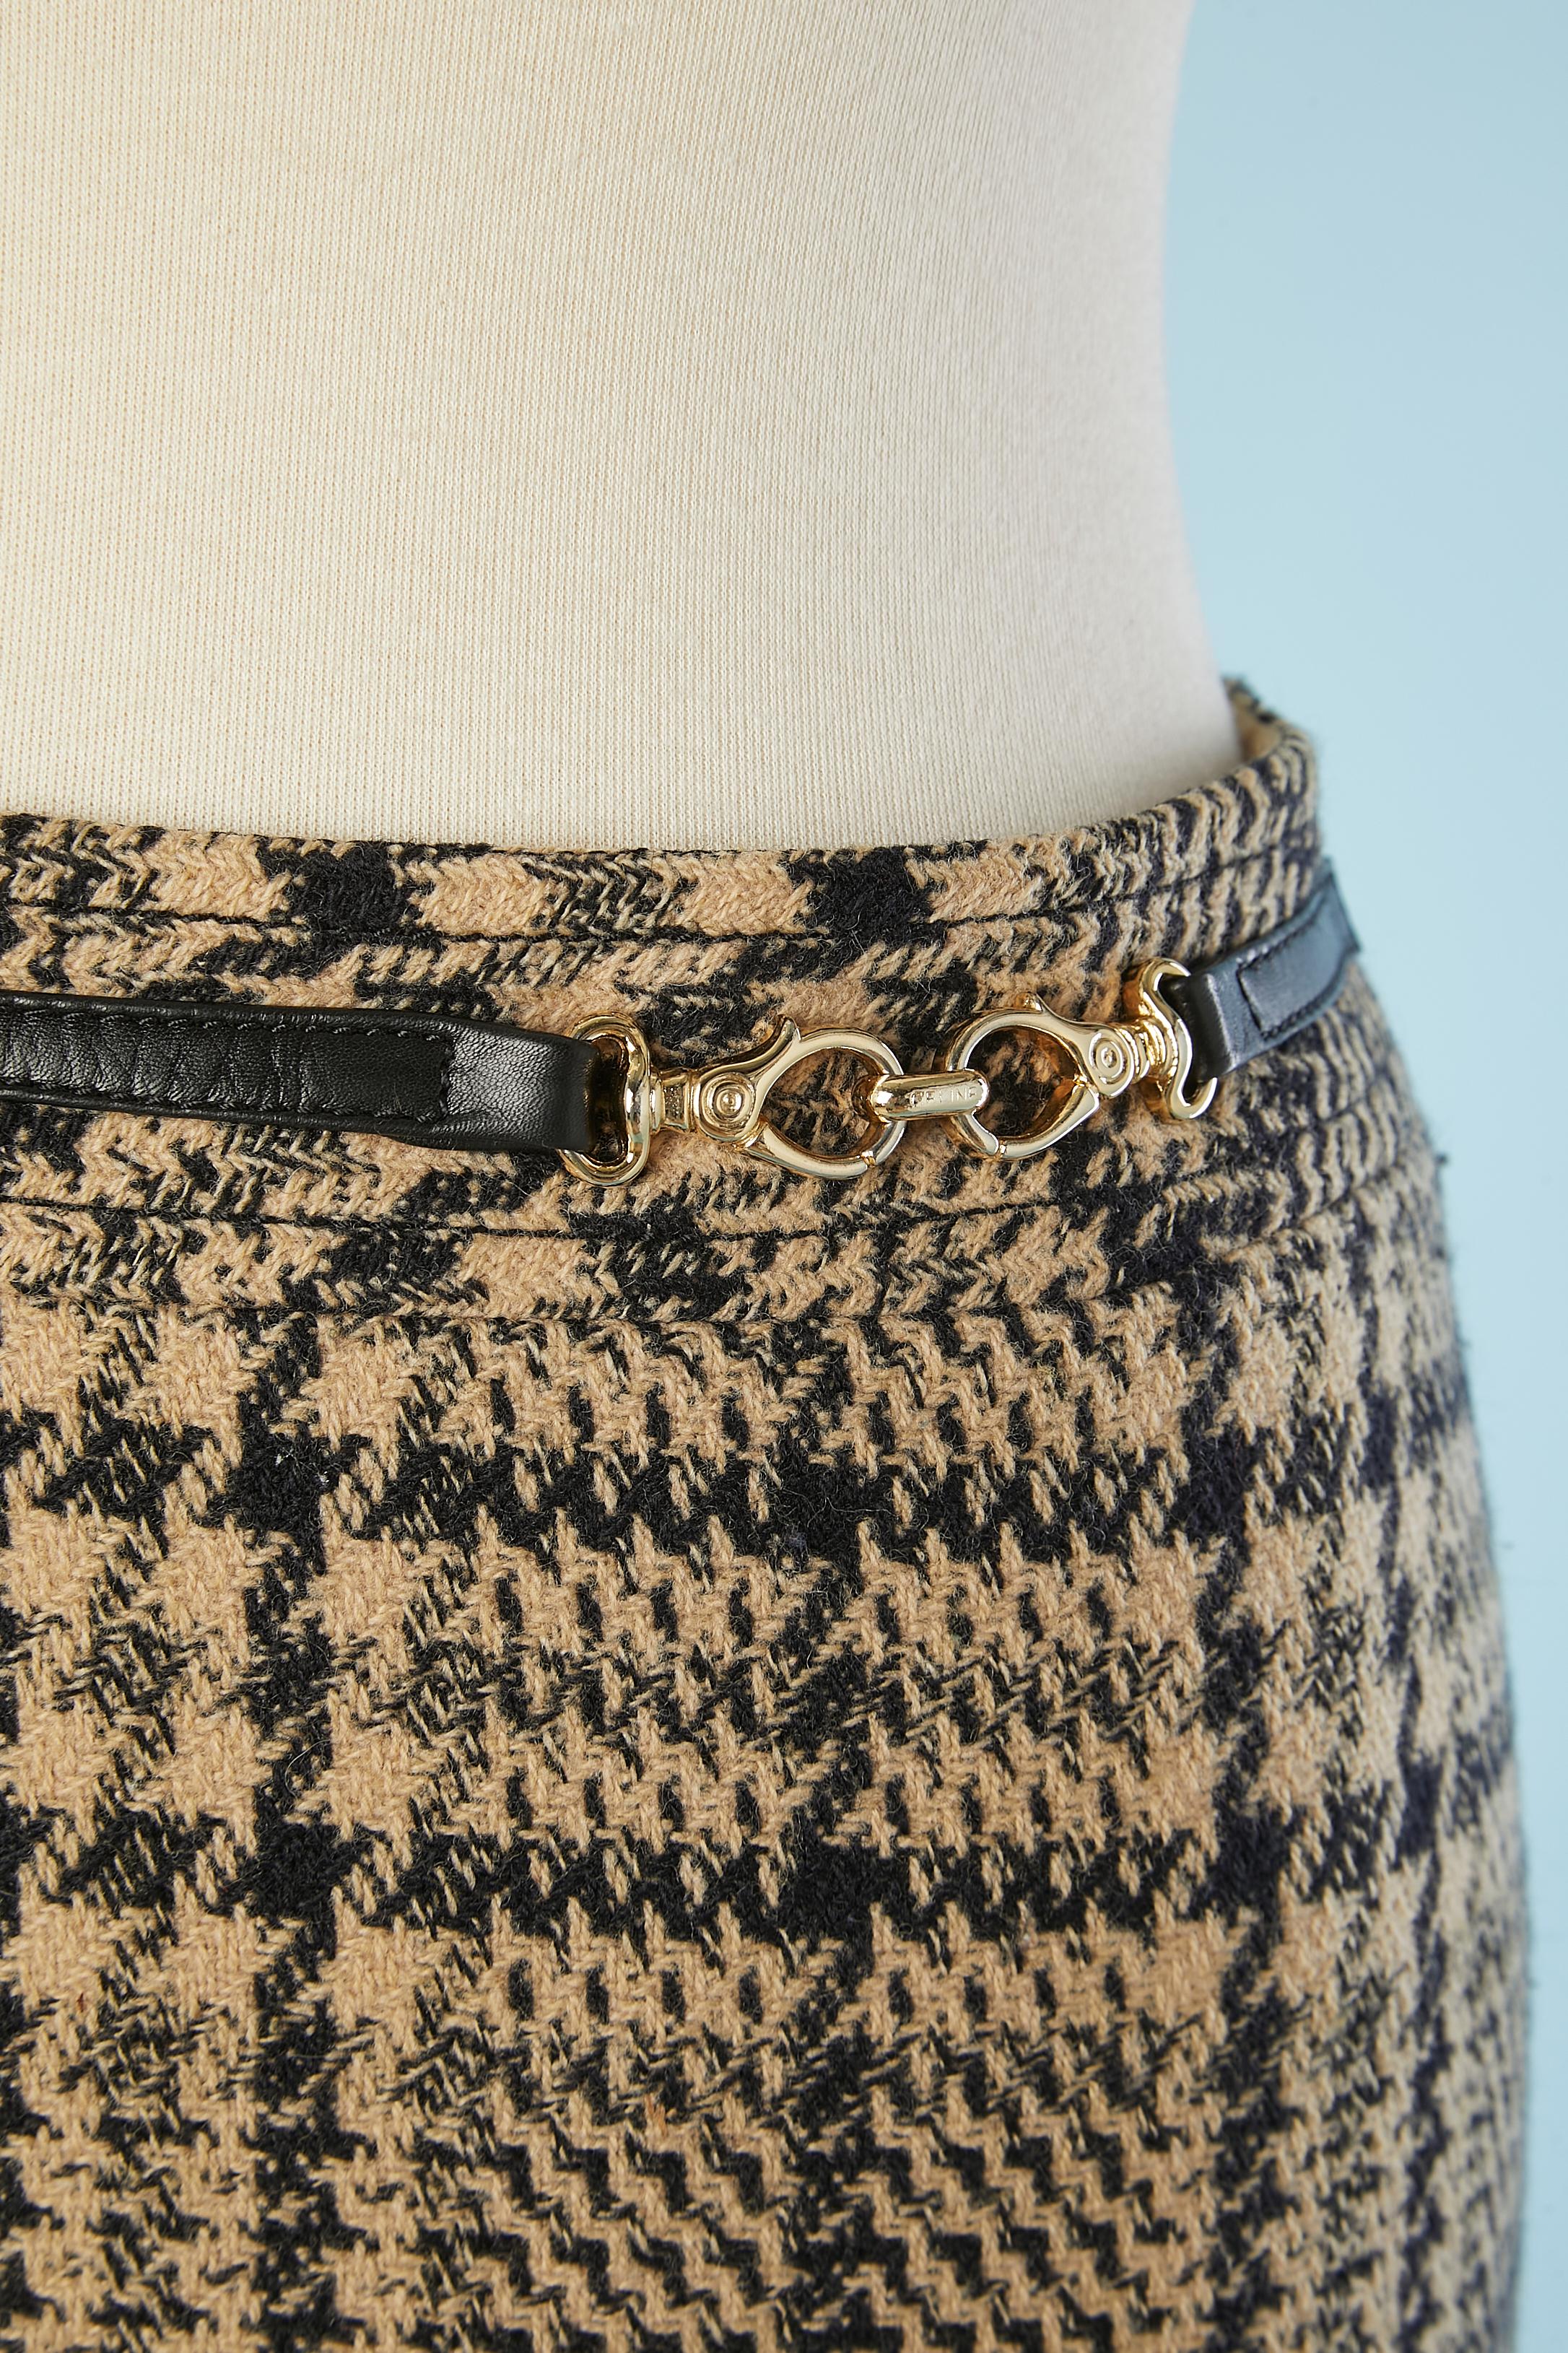 Tweed skirt with gold metal buckle in the front. Branded lining. Fabric composition: 90% wool, 10% nylon. Lining: 100% Bemberg 
Split in the middle back, lenght= 17 cm
Zip and hook&eye in the middle back.
SIZE L 